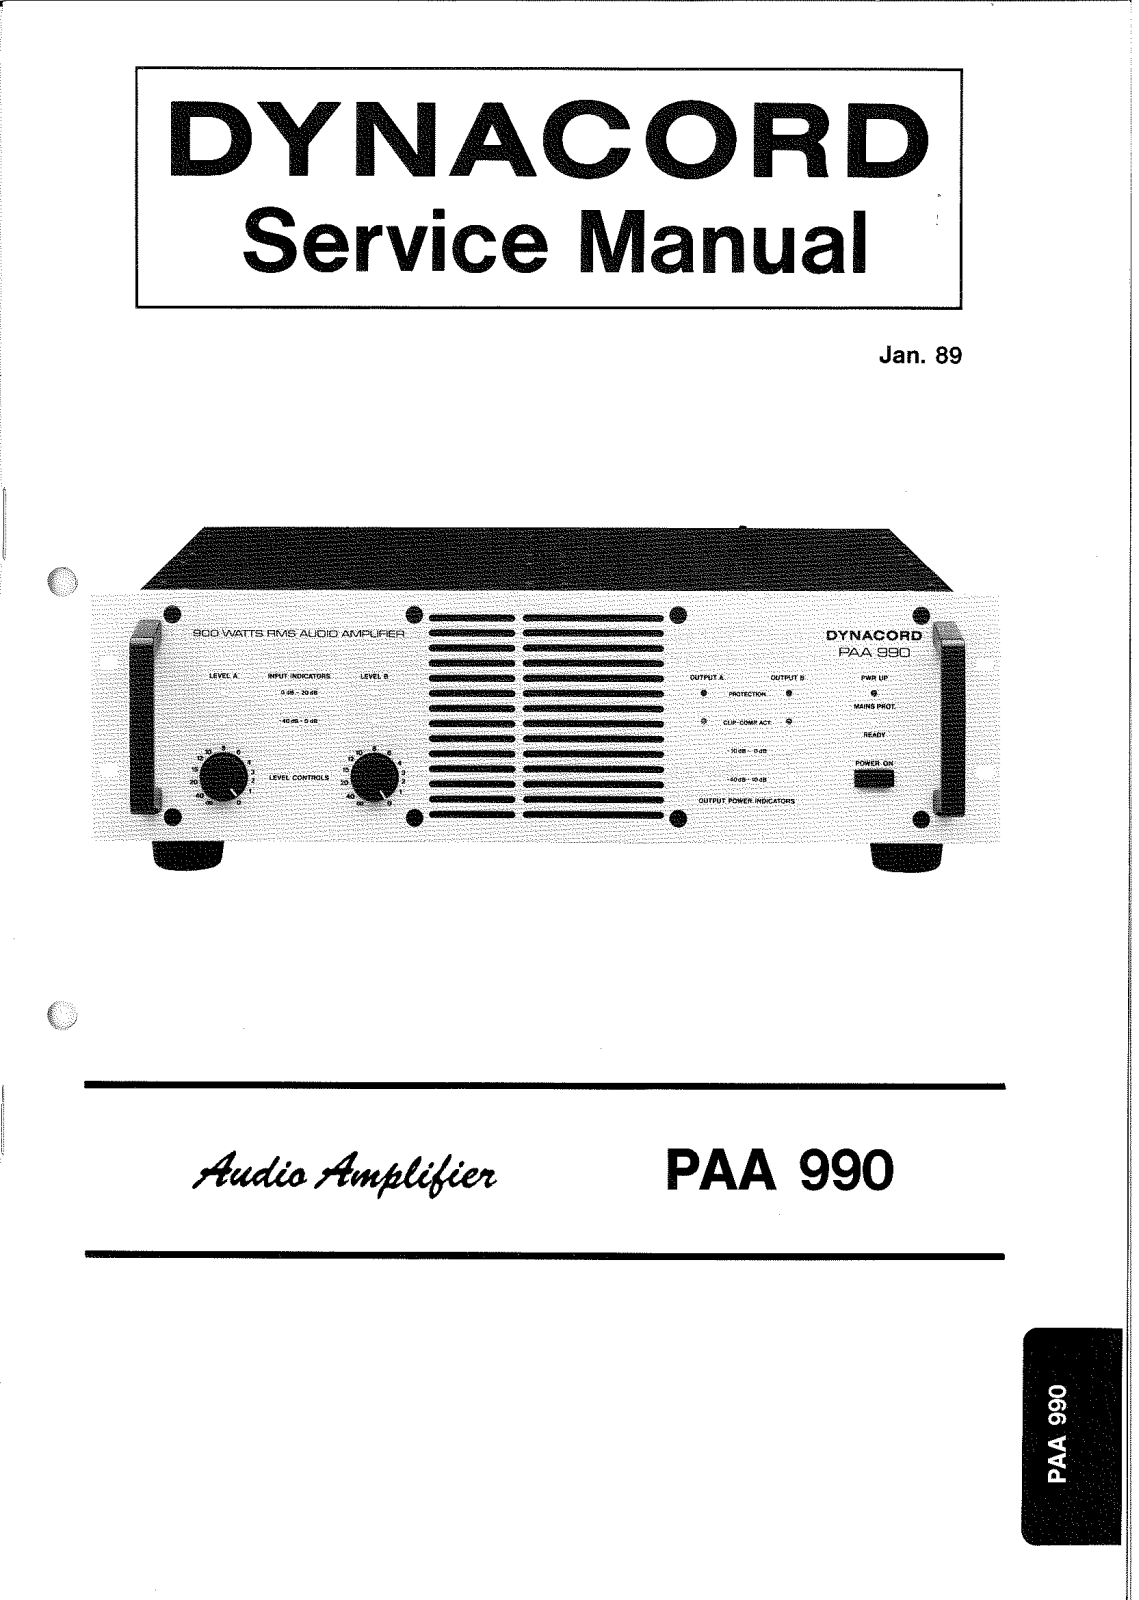 Dynacord PAA 990 SERVICE MANUAL